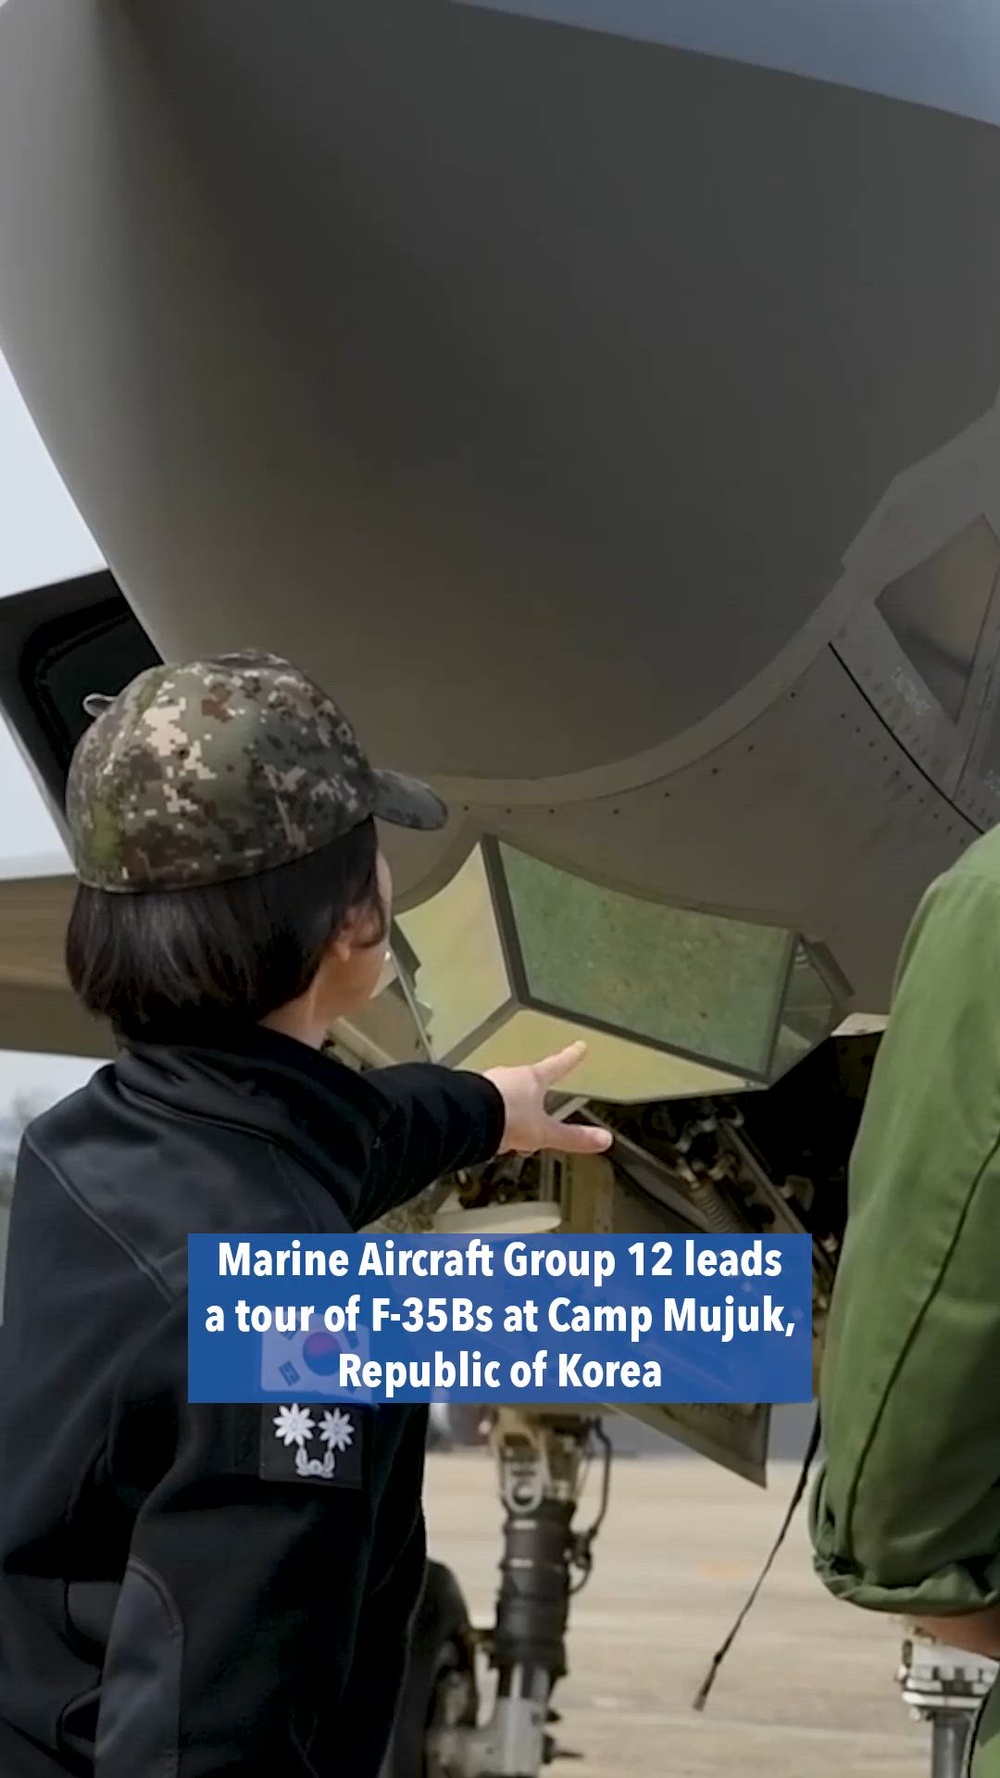 DVIDS – Video – MAG-12 conducts tour with an F-35B aircraft to RoK Marine and Naval Leadership at Camp Mujuk